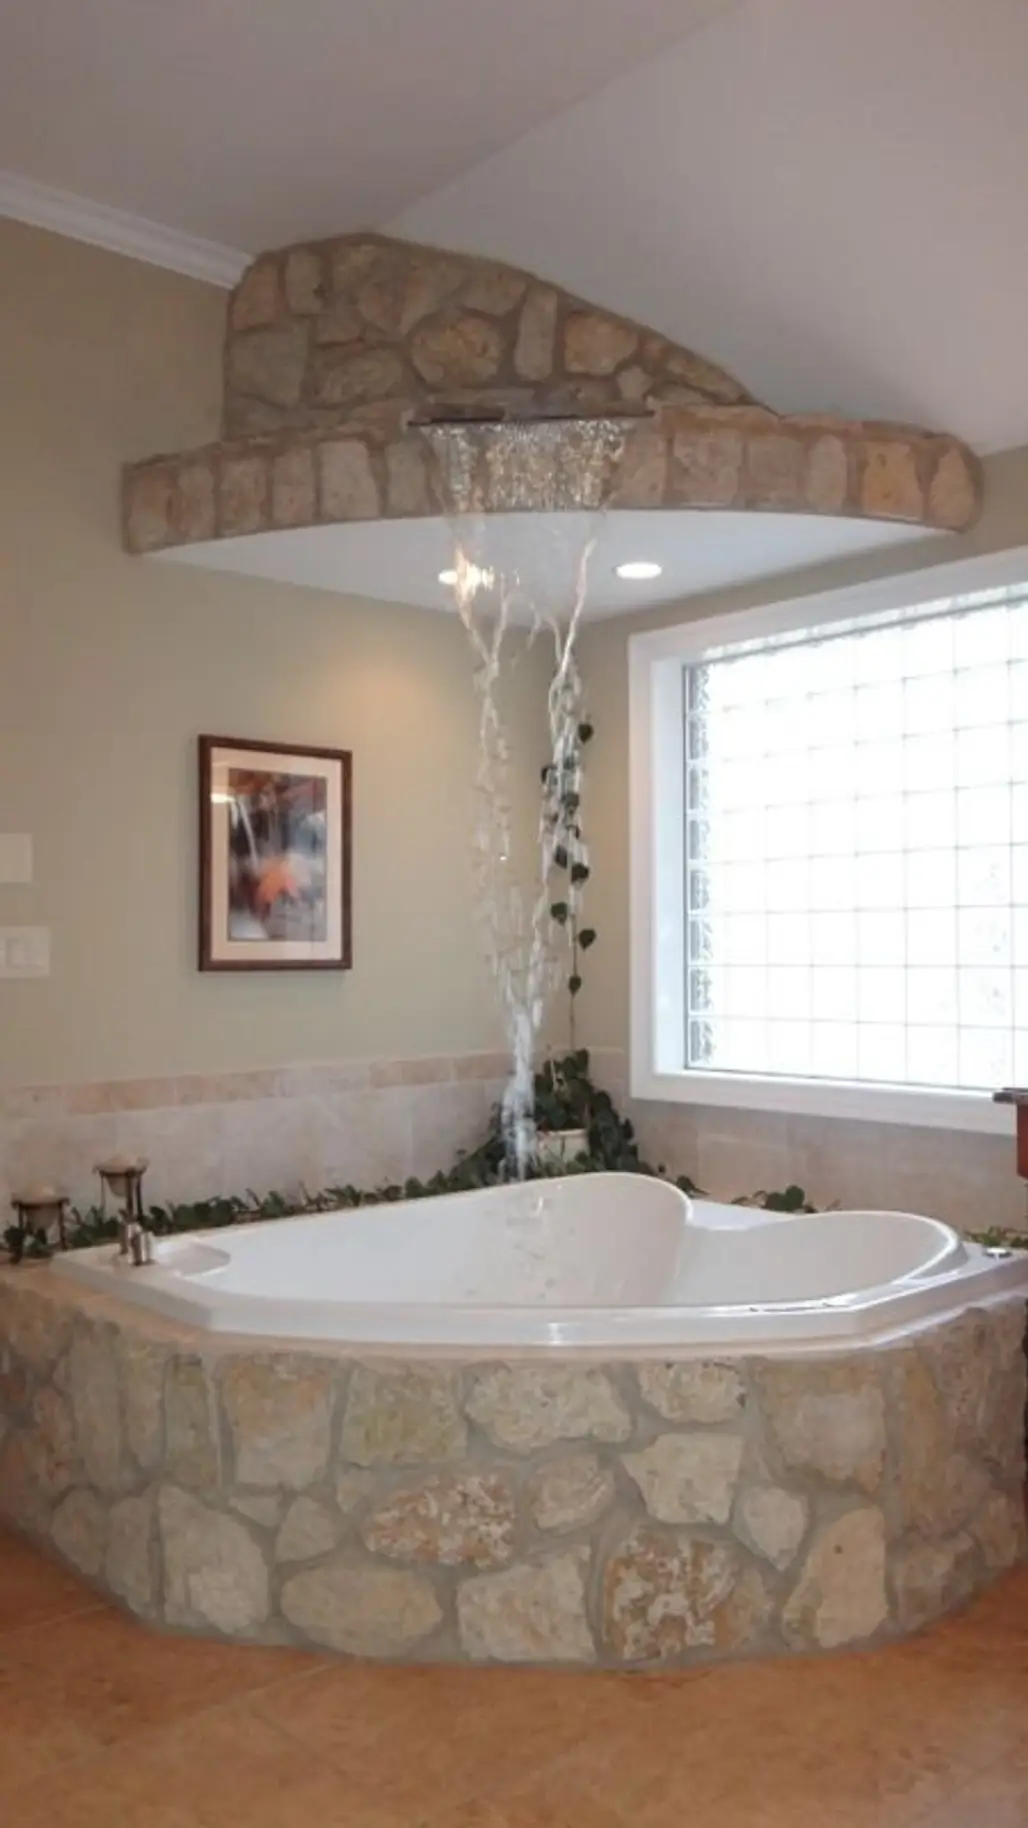 Stone Waterfall Feature Fills the Bubble Jet Tub from above